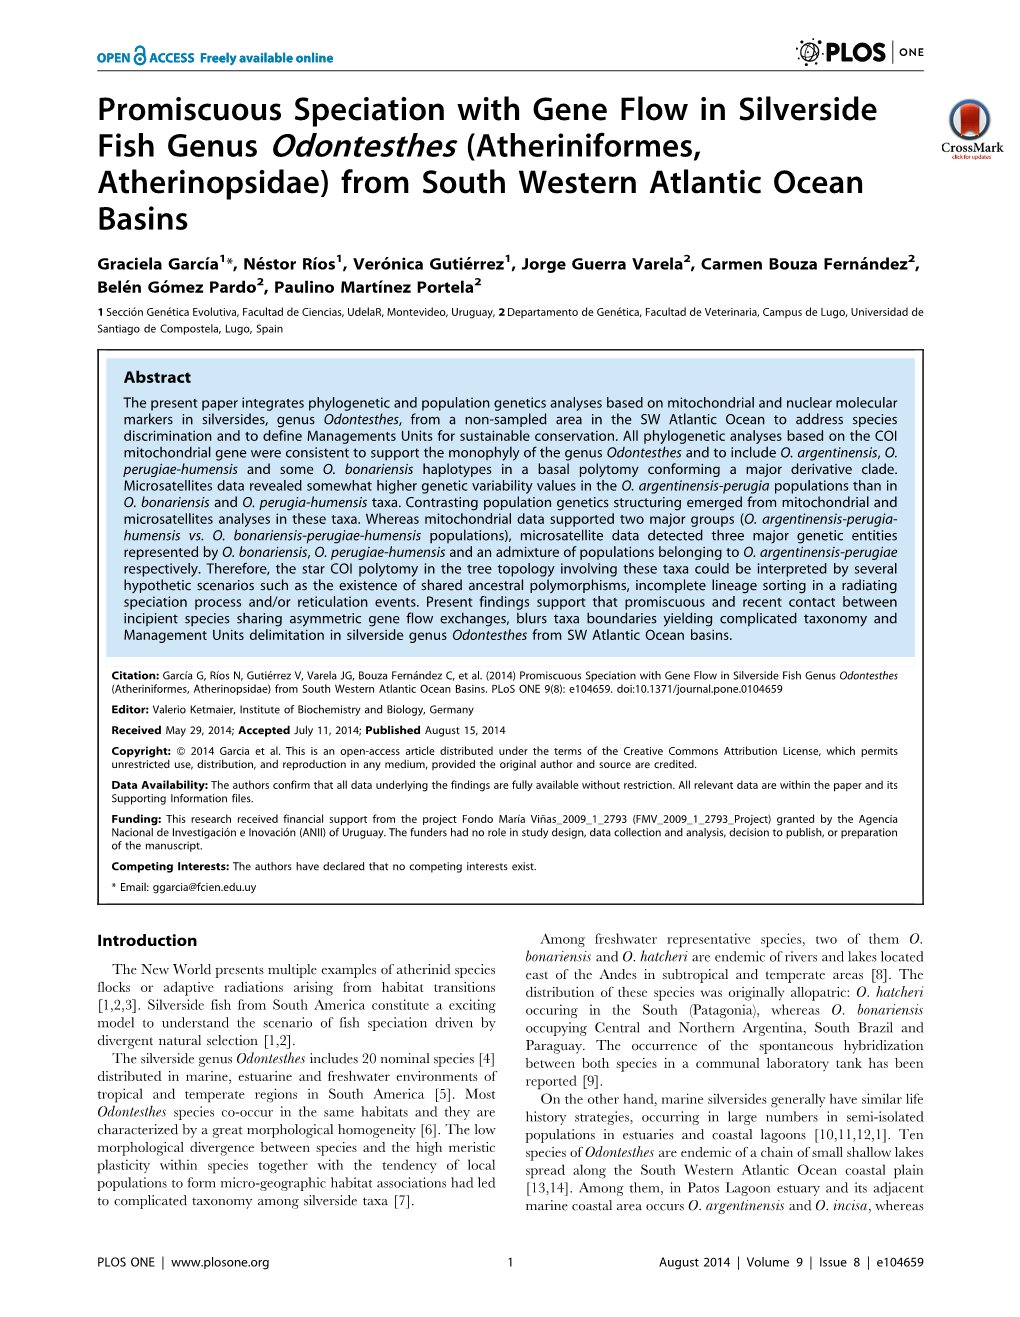 Promiscuous Speciation with Gene Flow in Silverside Fish Genus Odontesthes (Atheriniformes, Atherinopsidae) from South Western Atlantic Ocean Basins